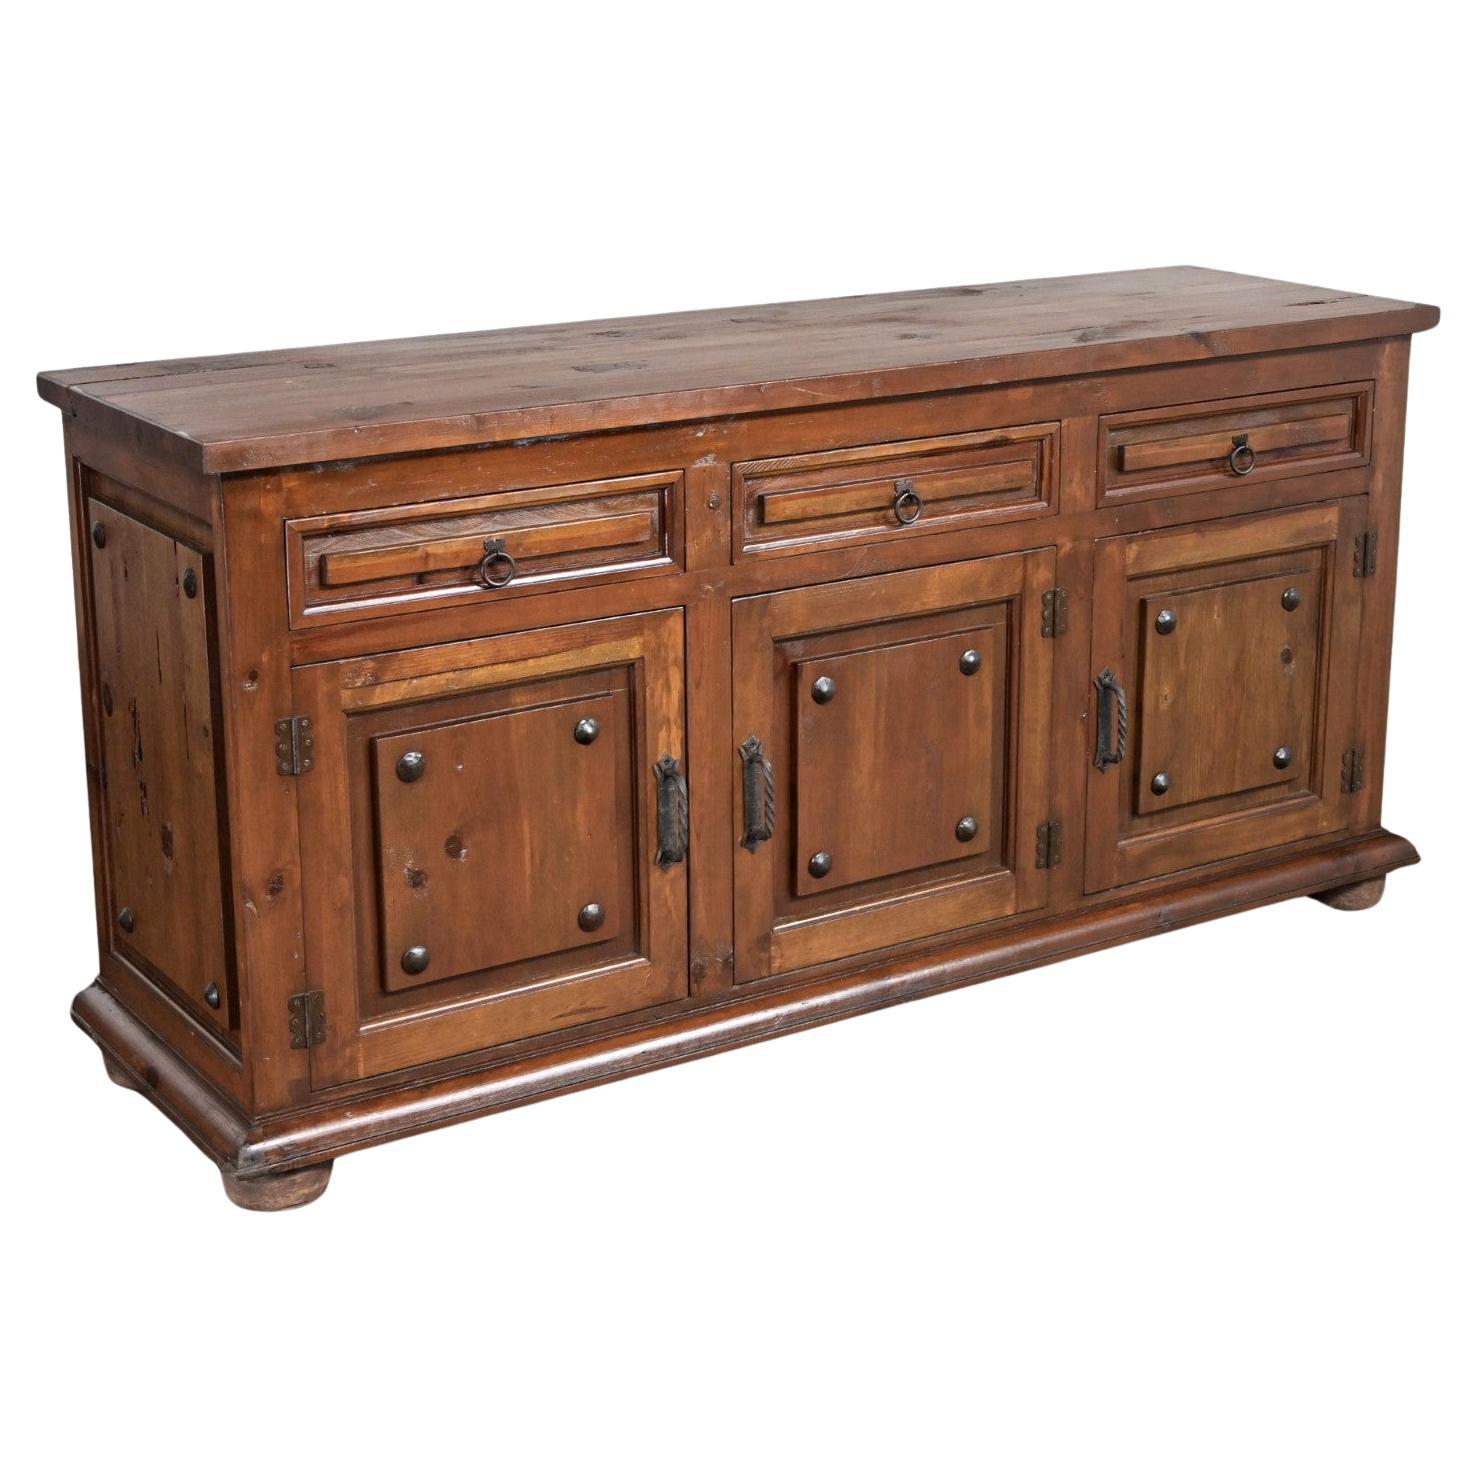 Spanish Revival Rustic Solid Pine Sideboard Style of Artes De Mexico Intern'tnl  For Sale